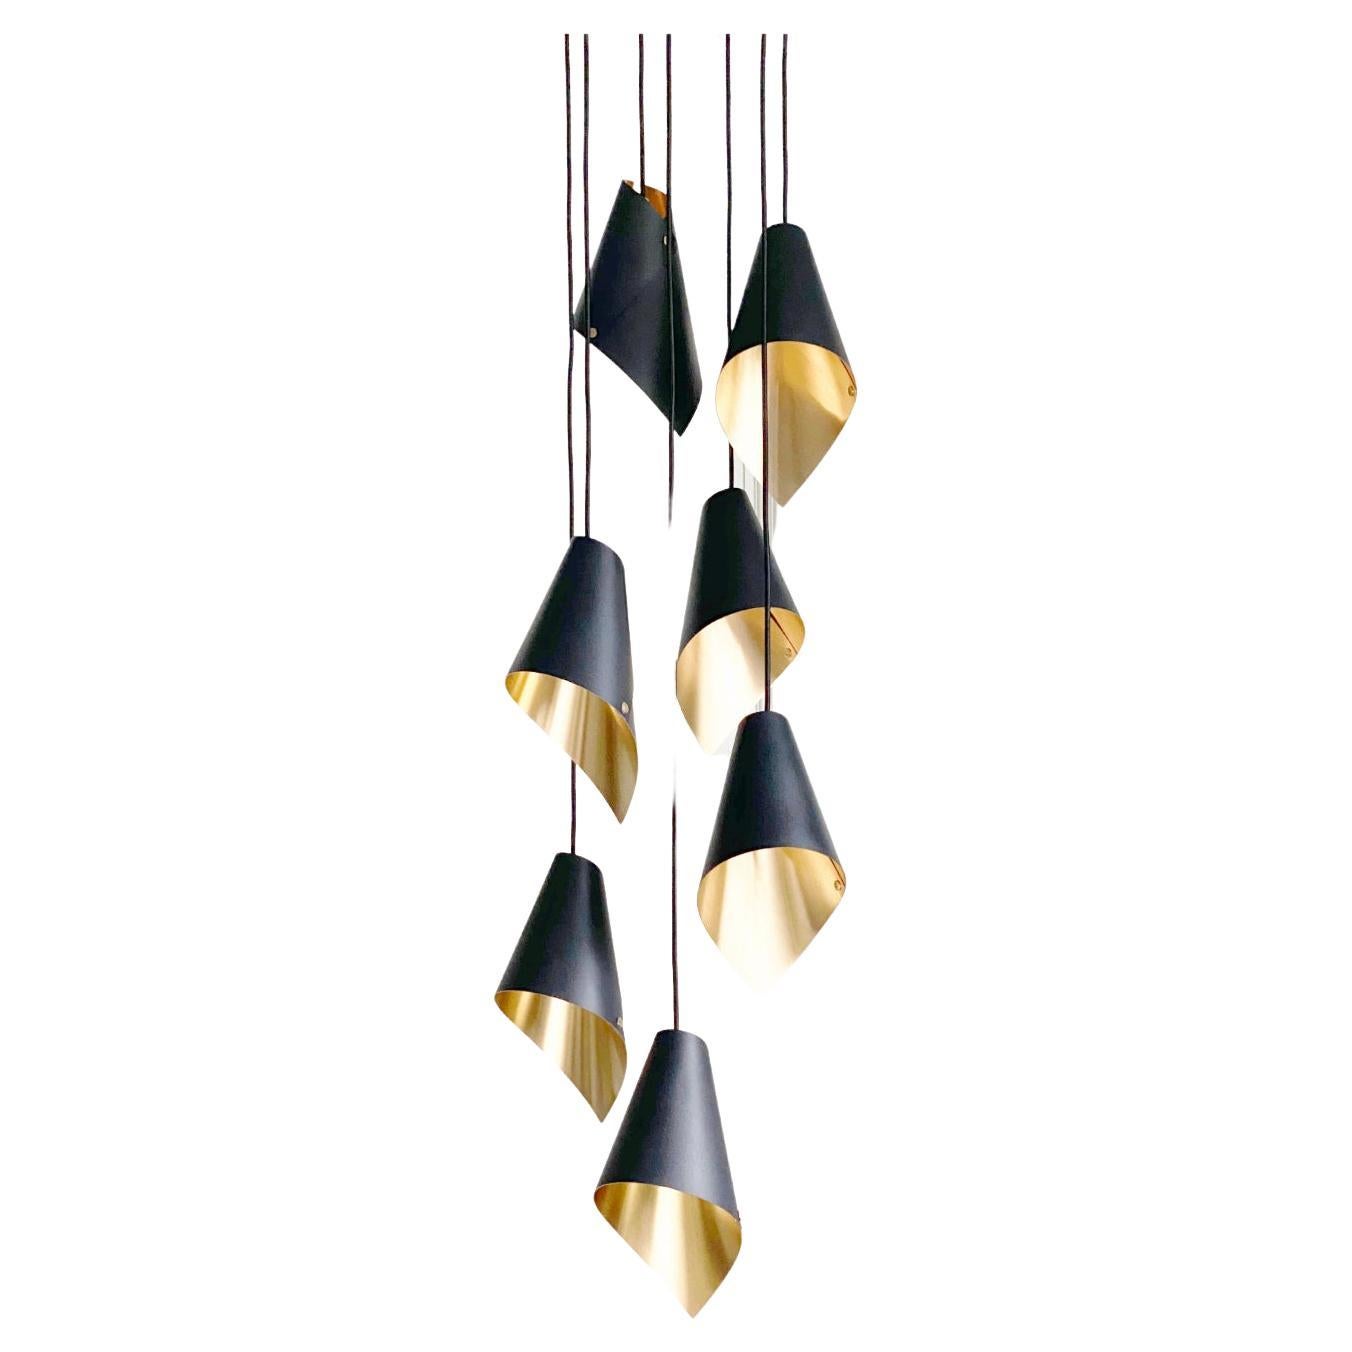 ARC 7 Modern Pendant Light in Black and Brushed Brass Made in Britain For Sale